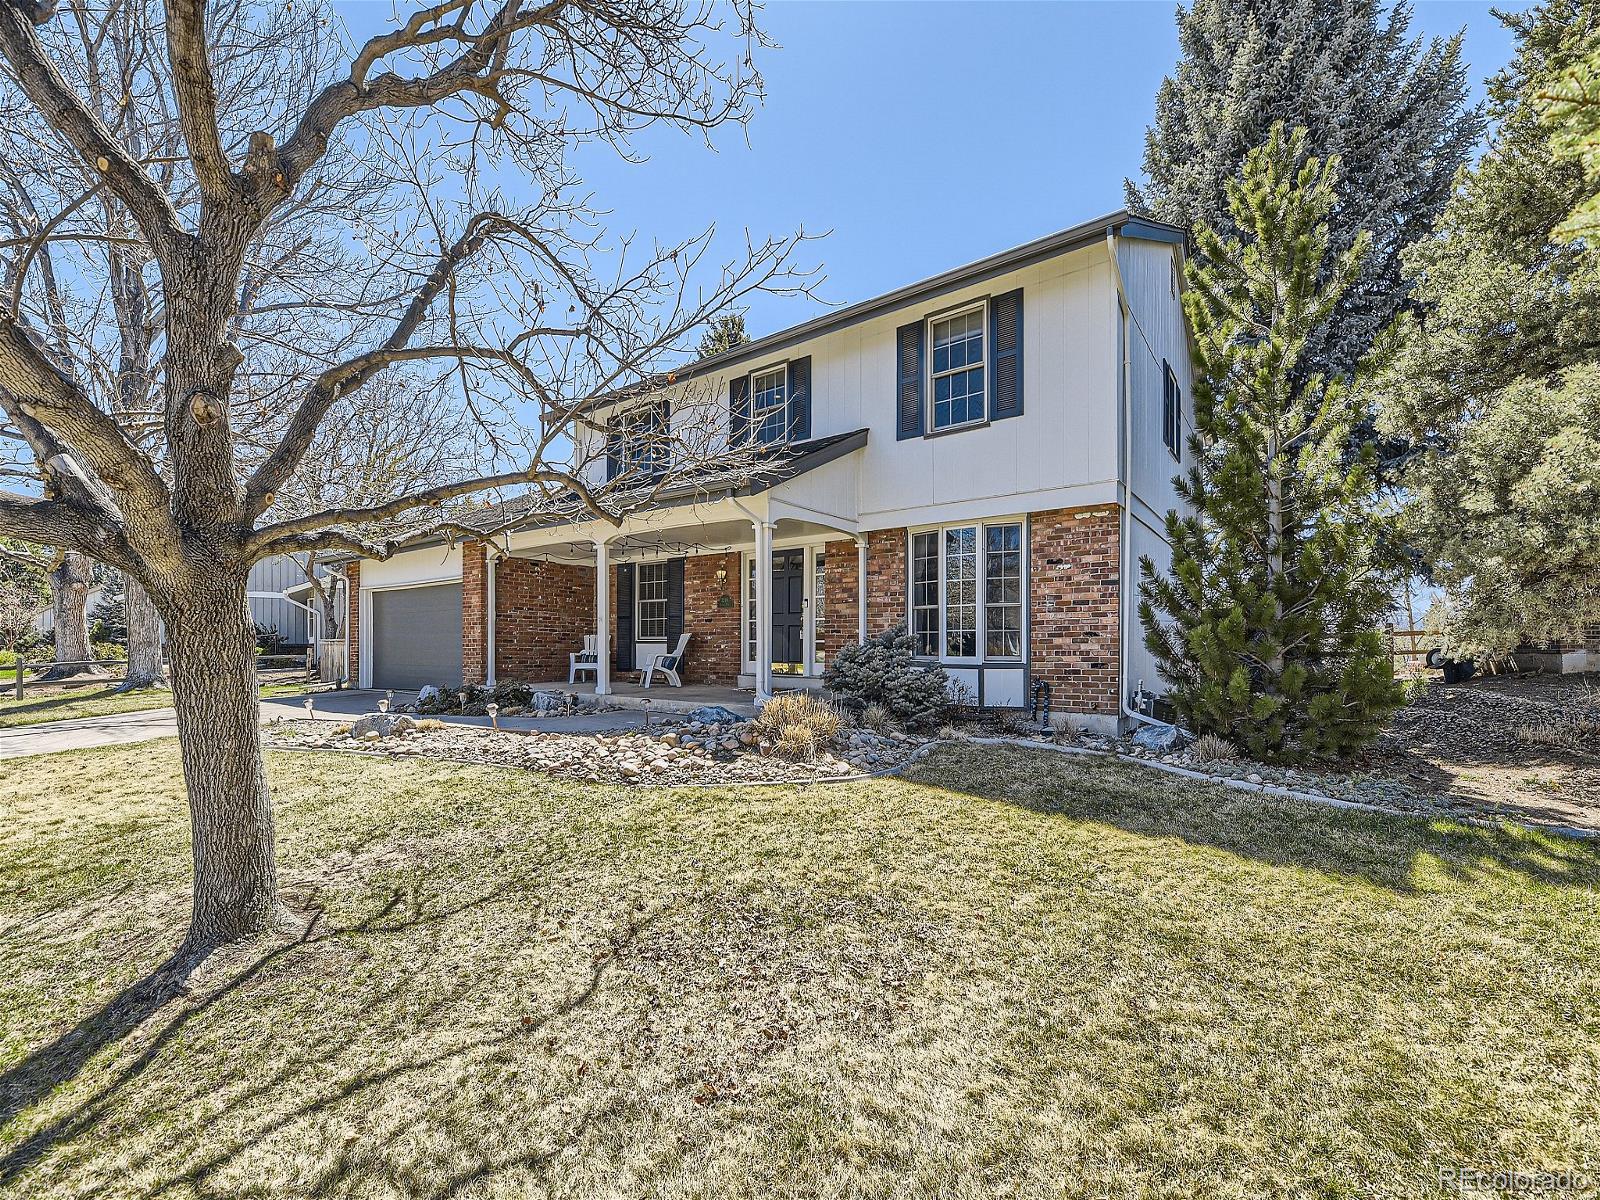 3246 e easter place, Centennial sold home. Closed on 2024-04-23 for $929,000.